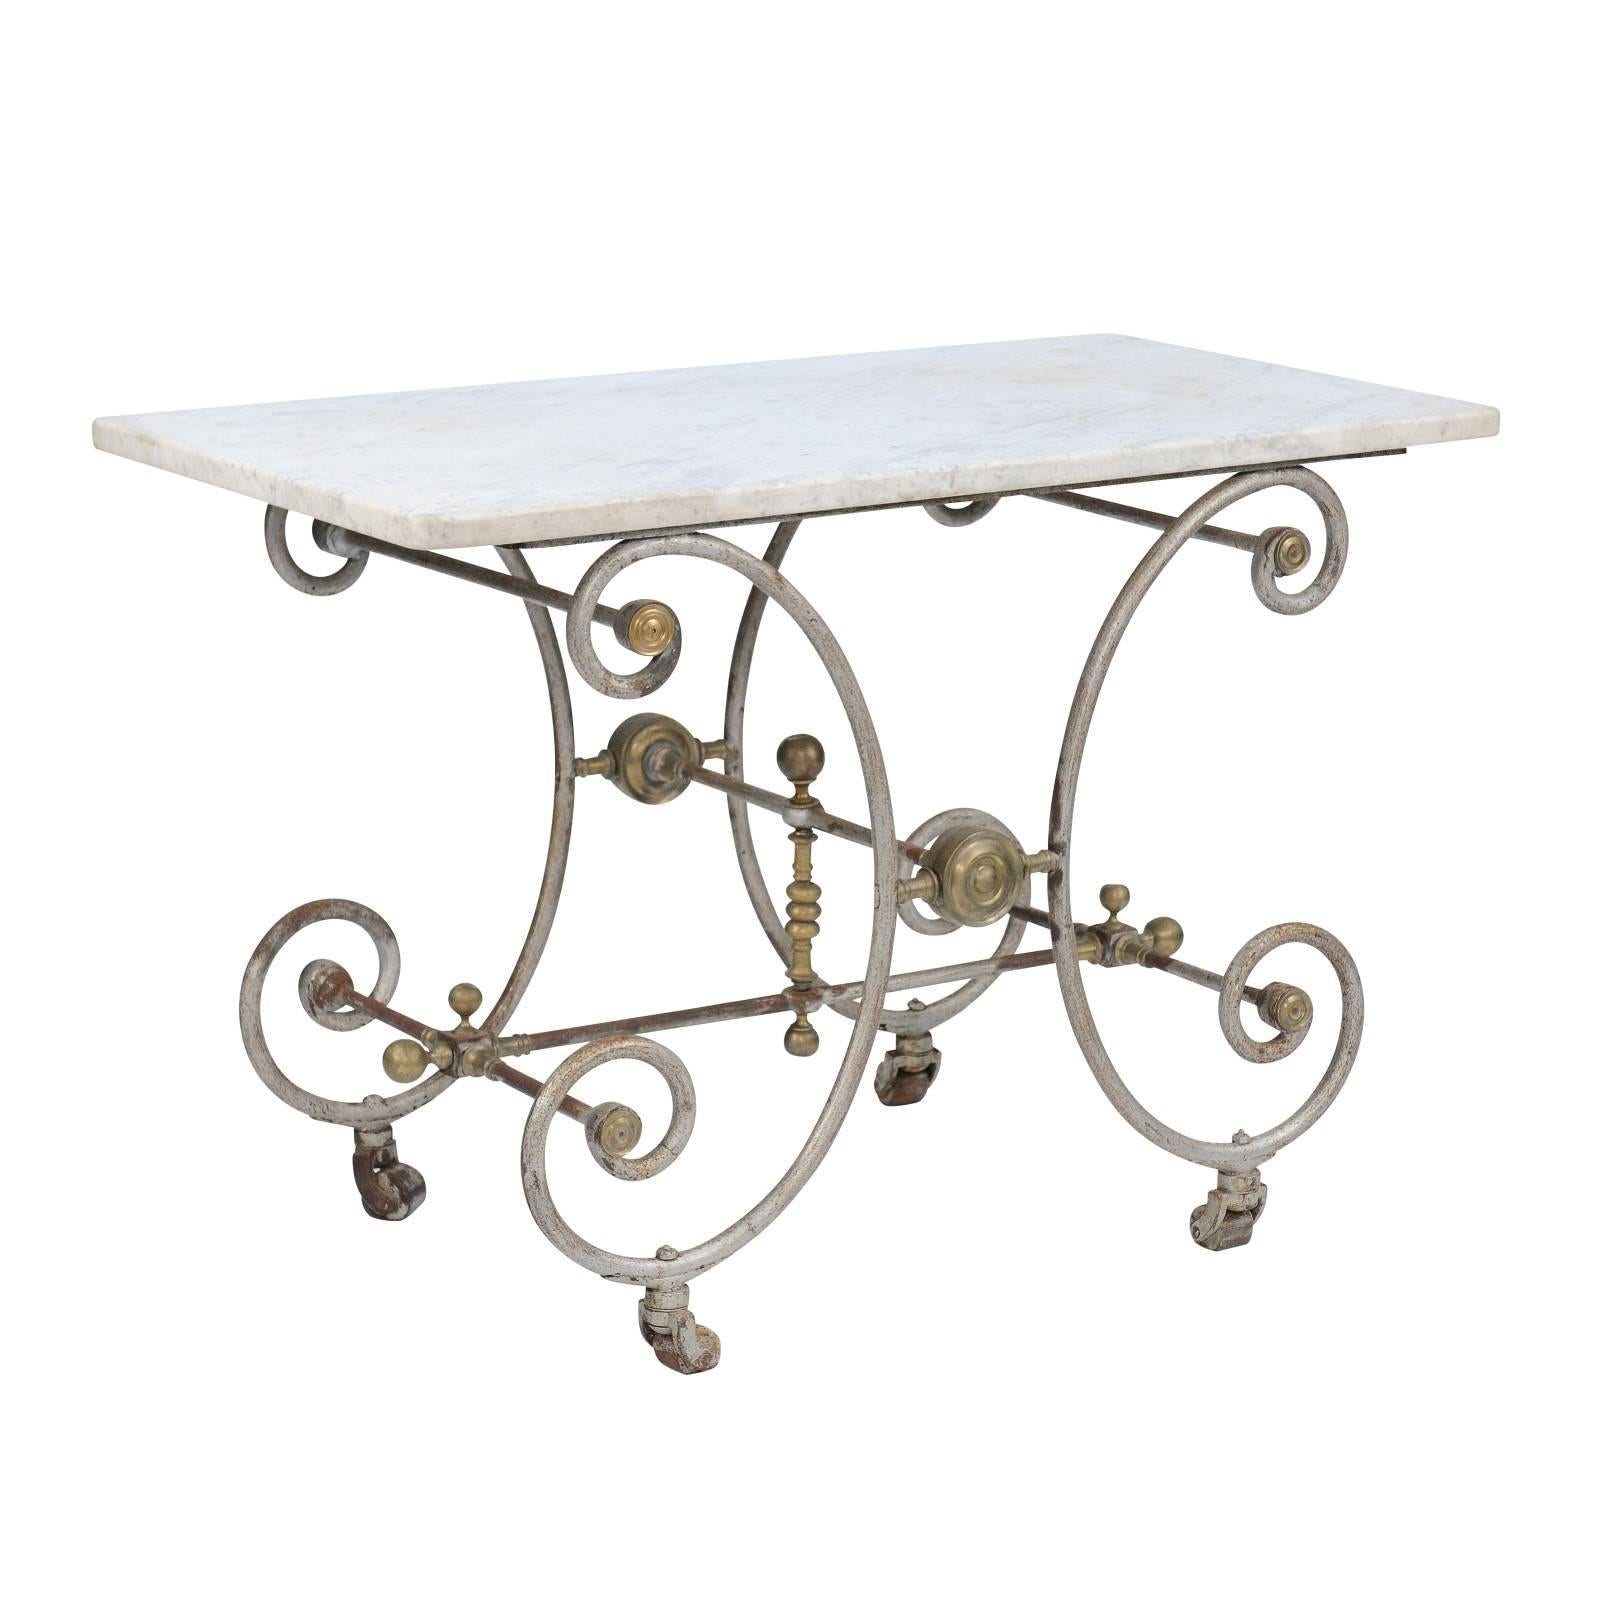 A French early 20th century baker's table with marble top and curly iron base with silver and gold accents. We love a gorgeous baker’s table, and this one from the 1900s doesn’t disappoint! We were first drawn to the exceptional rose colored marble